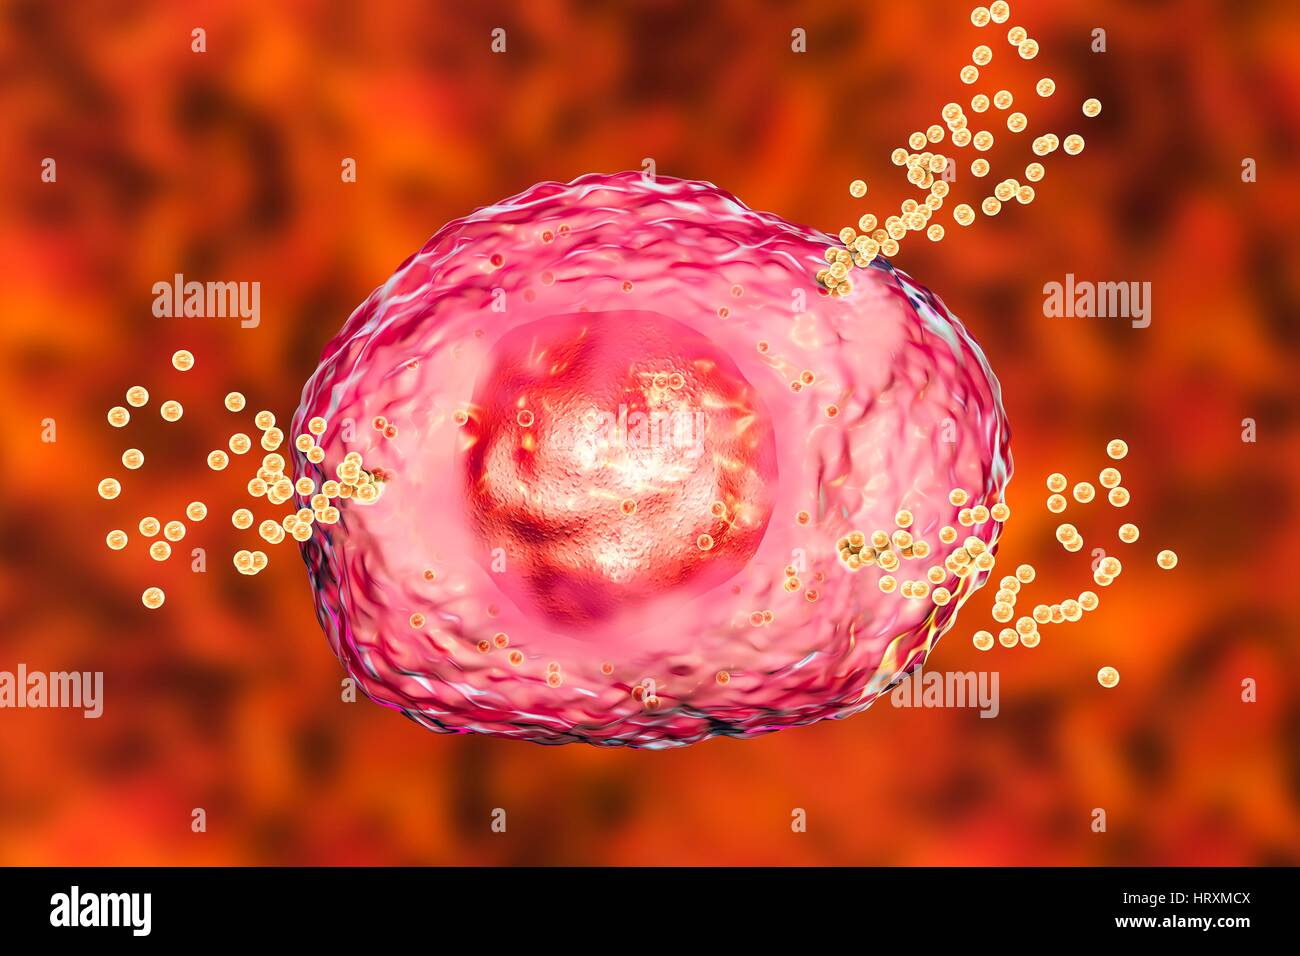 Mast cell releasing histamine during allergic response,computer illustration.Mast cells are type of leucocyte (white blood cell).They contain chemical mediators histamine,serotonin heparin.Histamine is released from mast cells in response to allergen,causing localized inflammatory immune Stock Photo